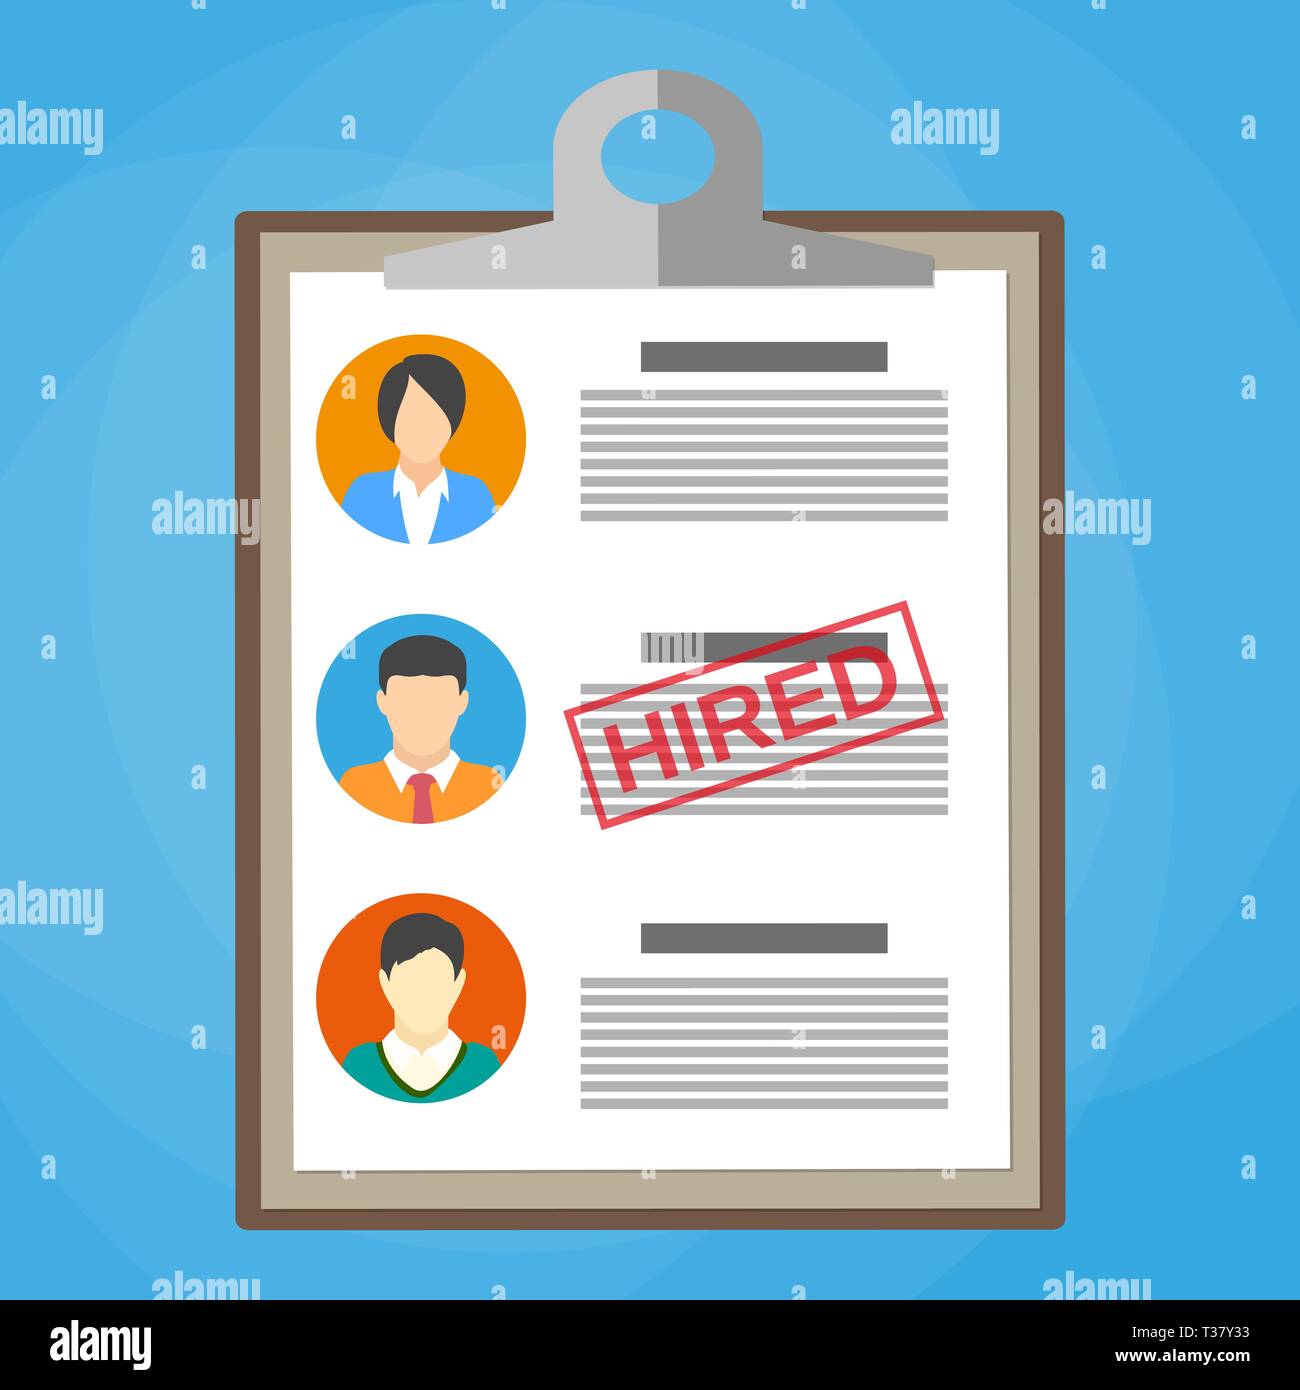 https://c8.alamy.com/comp/T37Y33/human-resources-management-concept-searching-professional-staff-analyzing-resume-papers-work-clipboard-with-resume-papers-and-hired-stamp-vector-T37Y33.jpg